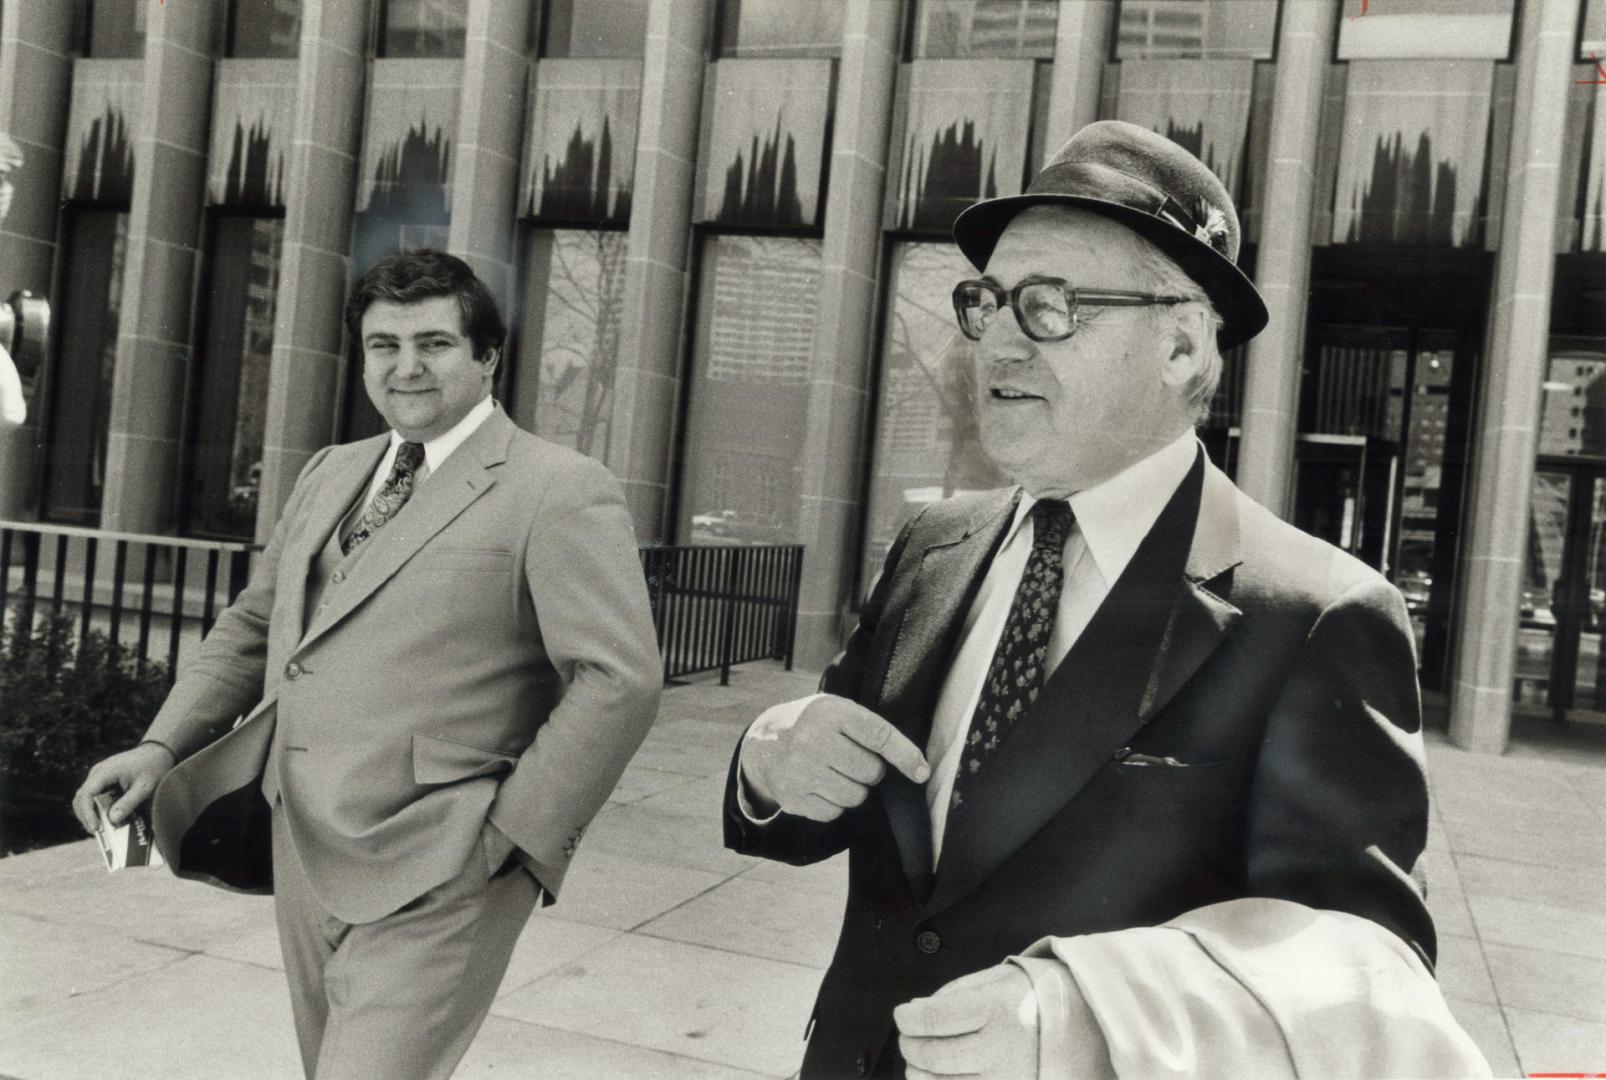 'Delighted' lawyer Edward Greenspan, left, and acquitted client Gerard Filion